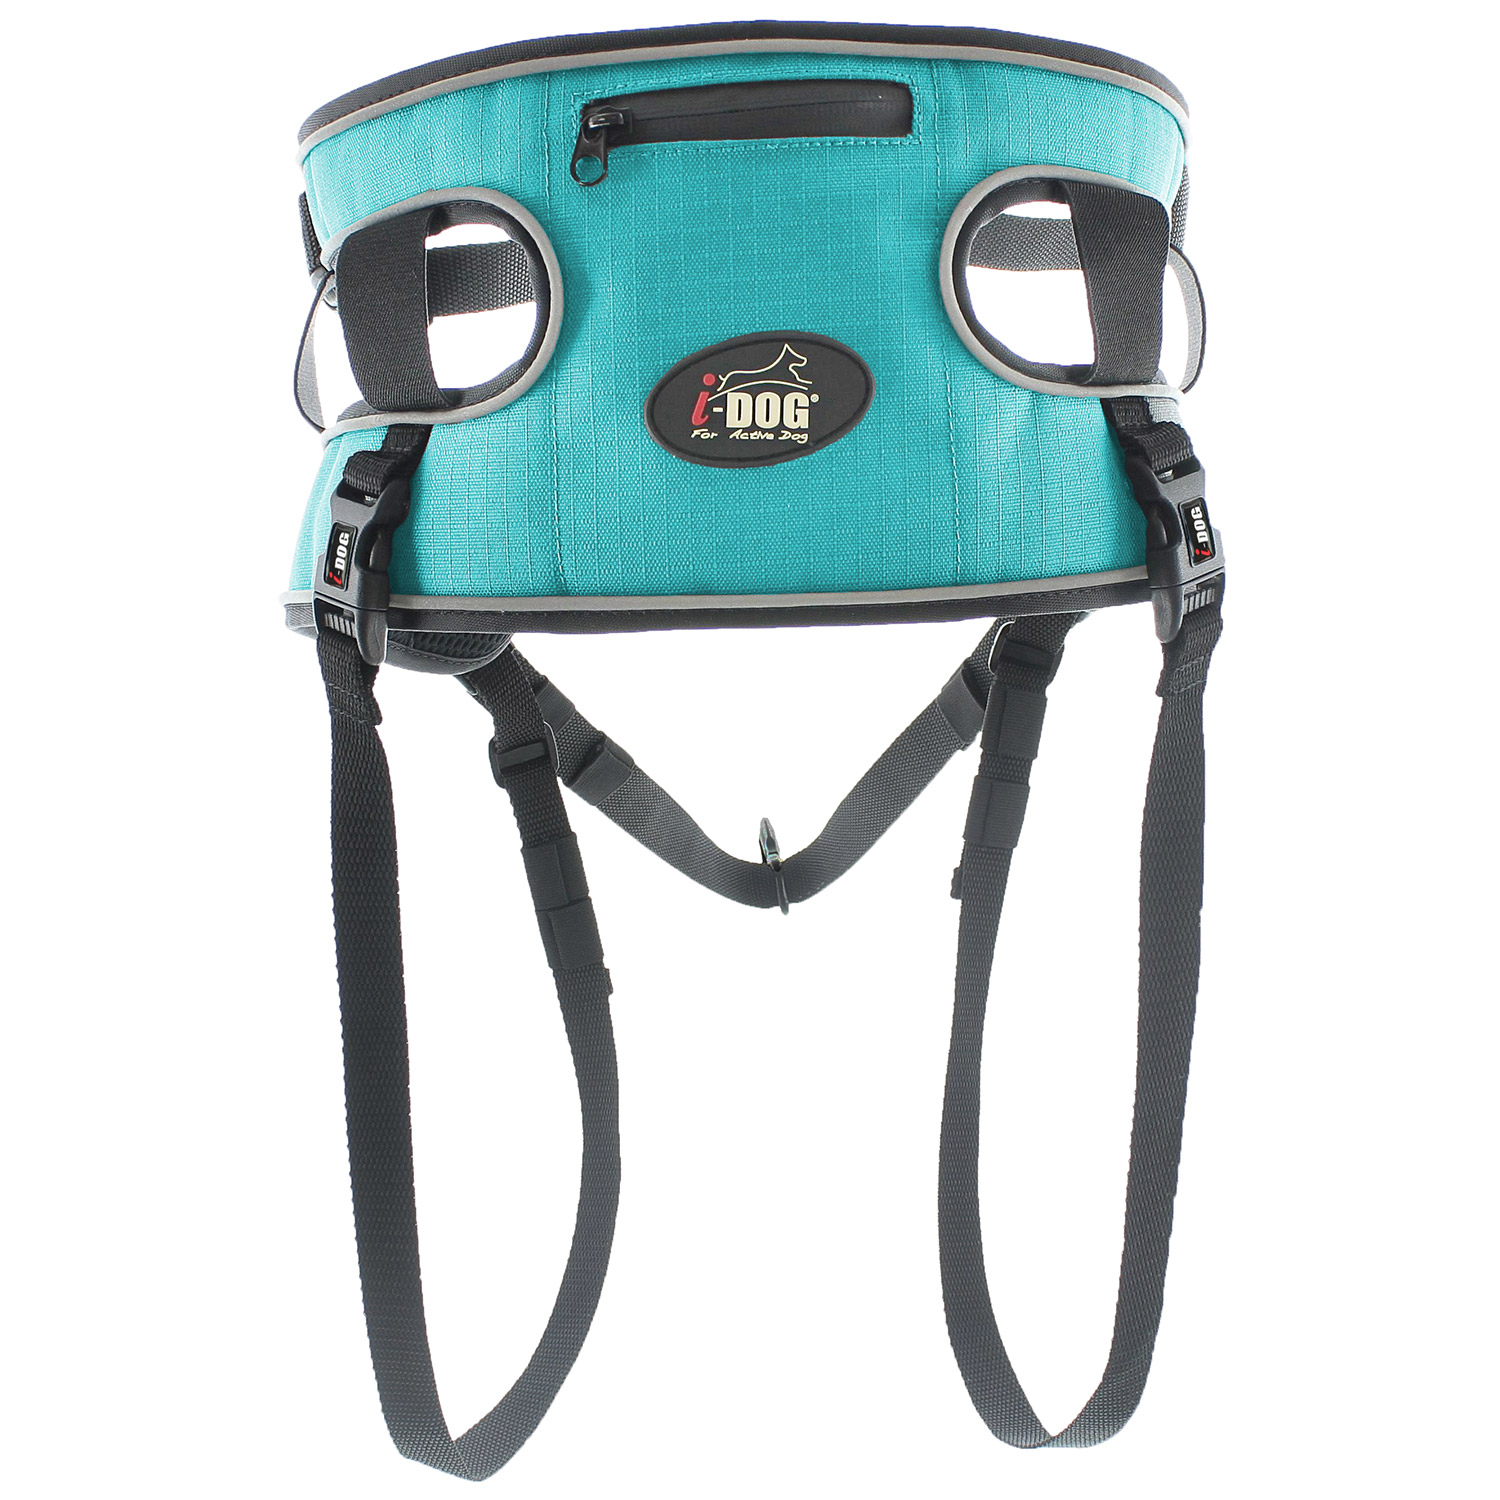 BAUDRIER CANICROSS/CANIMARCHE CONFORT I-DOG – Accessoires cani-rando